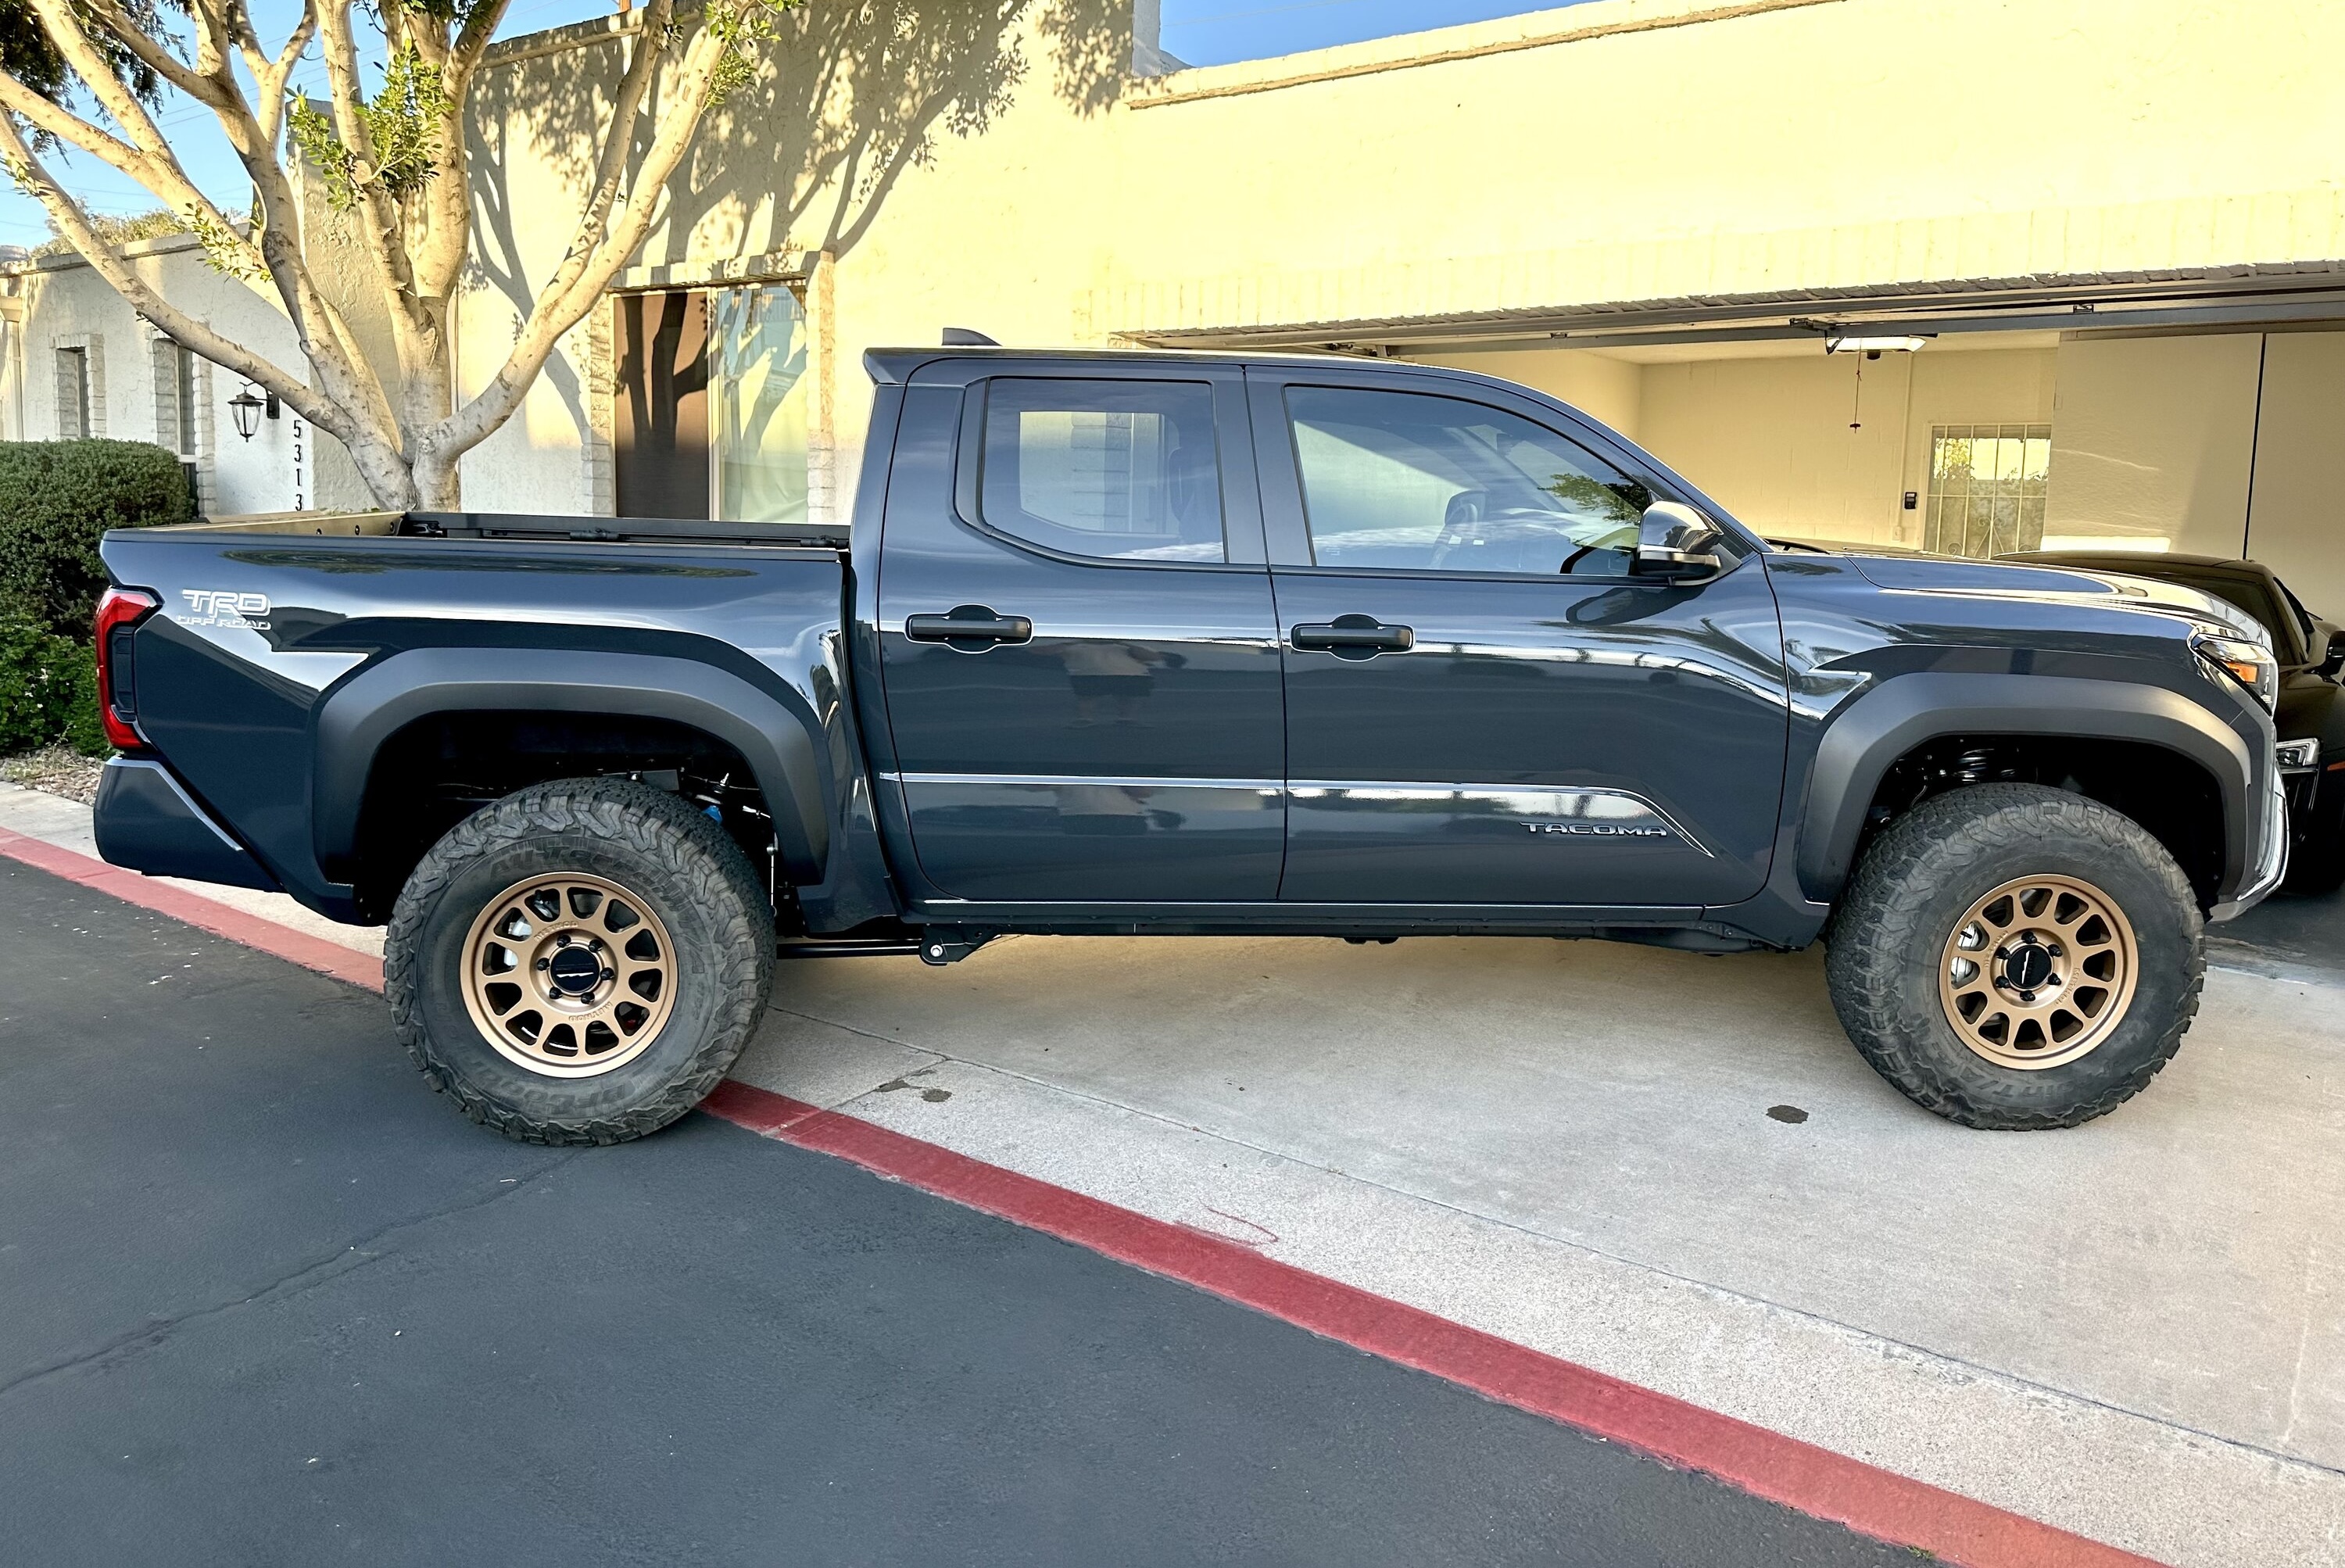 2024 Tacoma Official UNDERGROUND 2024 Tacoma Thread (4th Gen) 33's (285:70:17 tires) with 703 Method wheels (+35 offset) on factory suspension 2024 Tacoma 